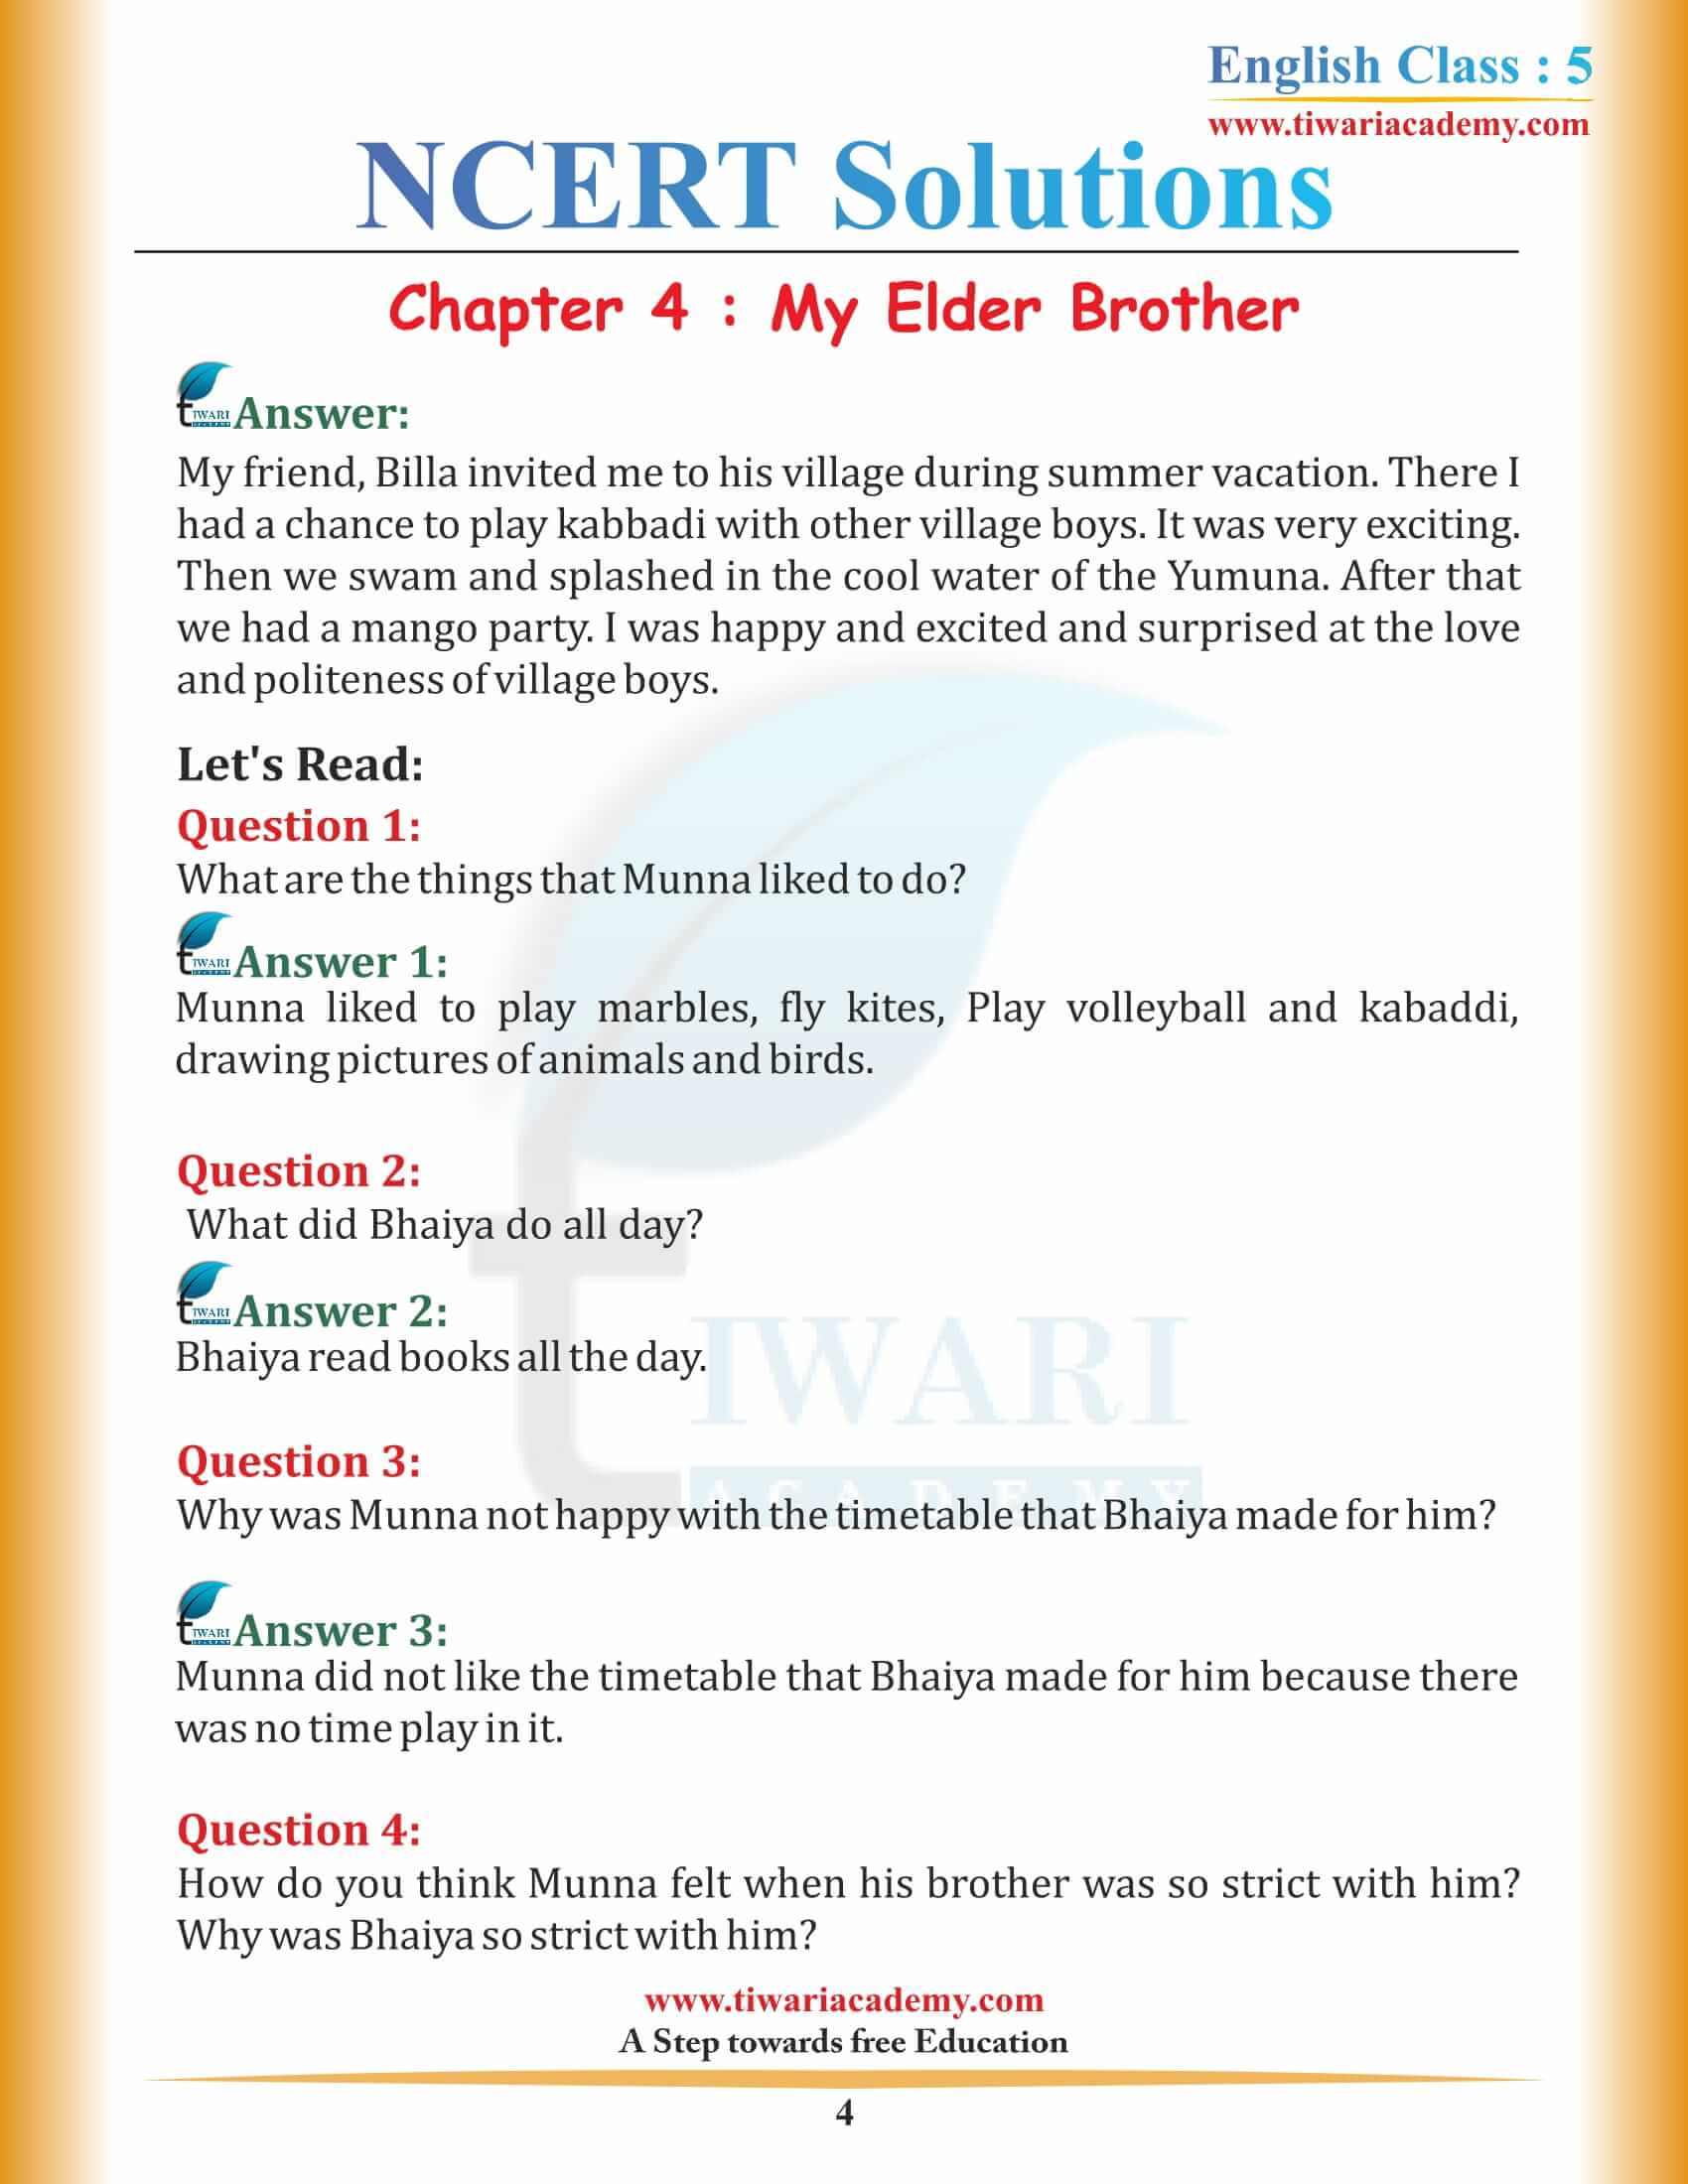 NCERT Solutions for Class 5 English Chapter 4 My Elder Brother